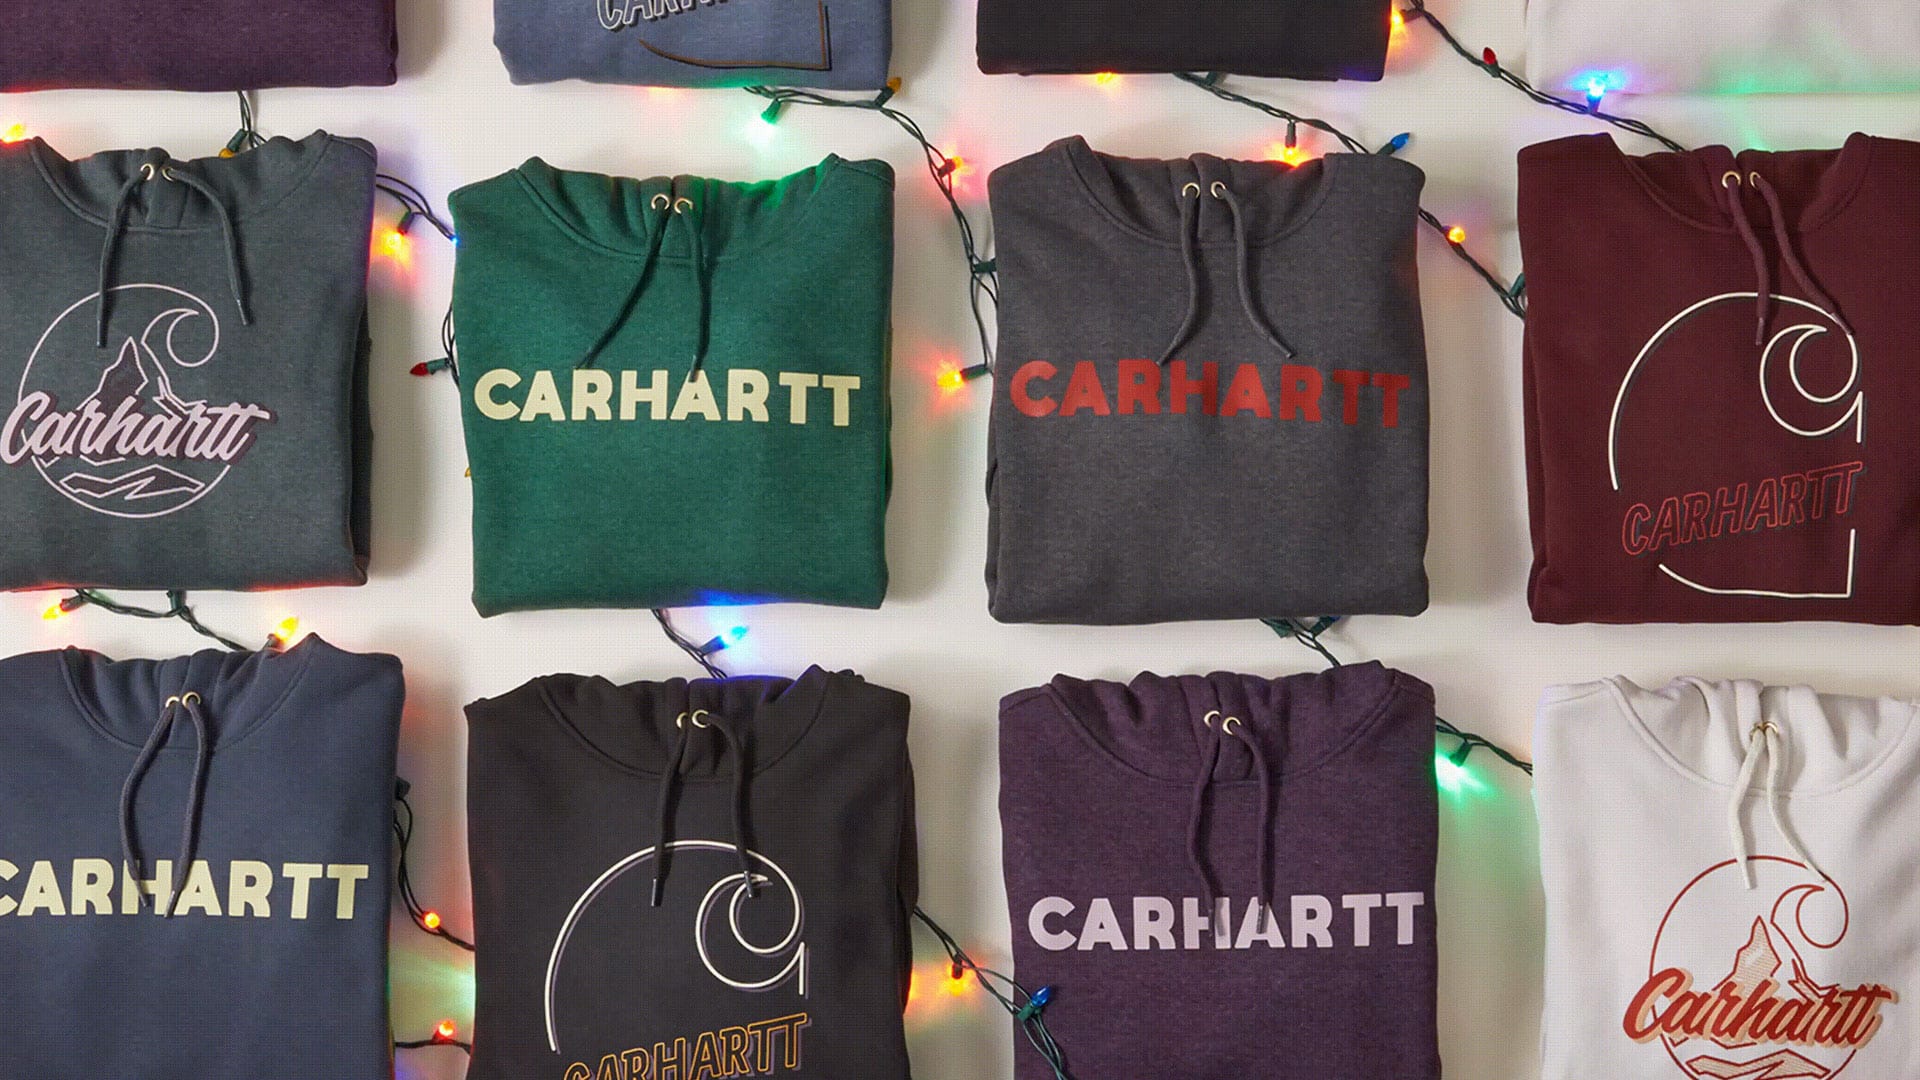 Antibiotika Hare Derfor Carhartt Black Friday Sale Includes Up to 50% on Cold Weather Gear